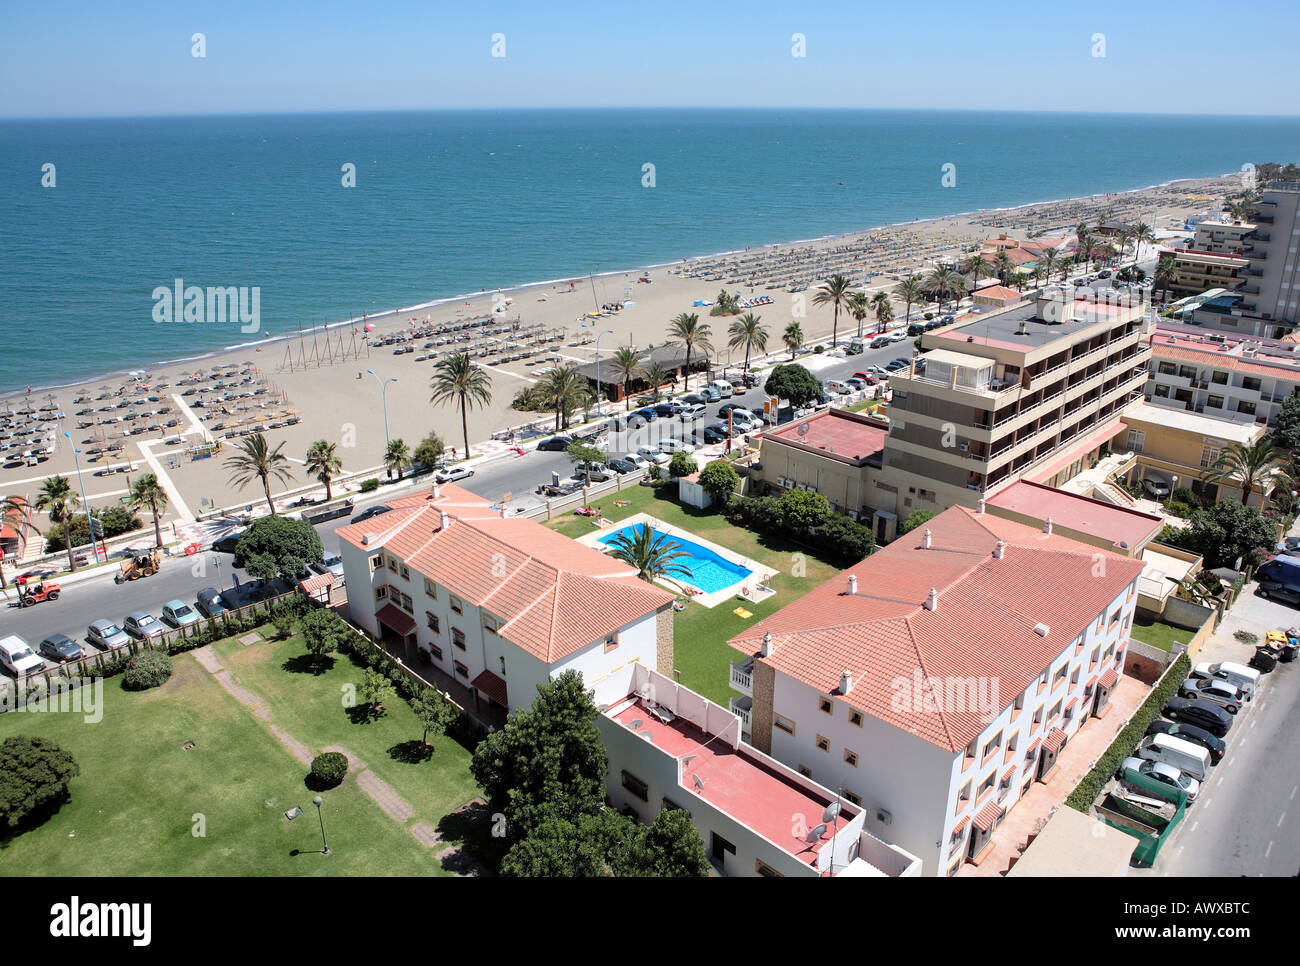 Aerial view of sandy beach road buildings and holidaymakers on vacation in the sun Stock Photo